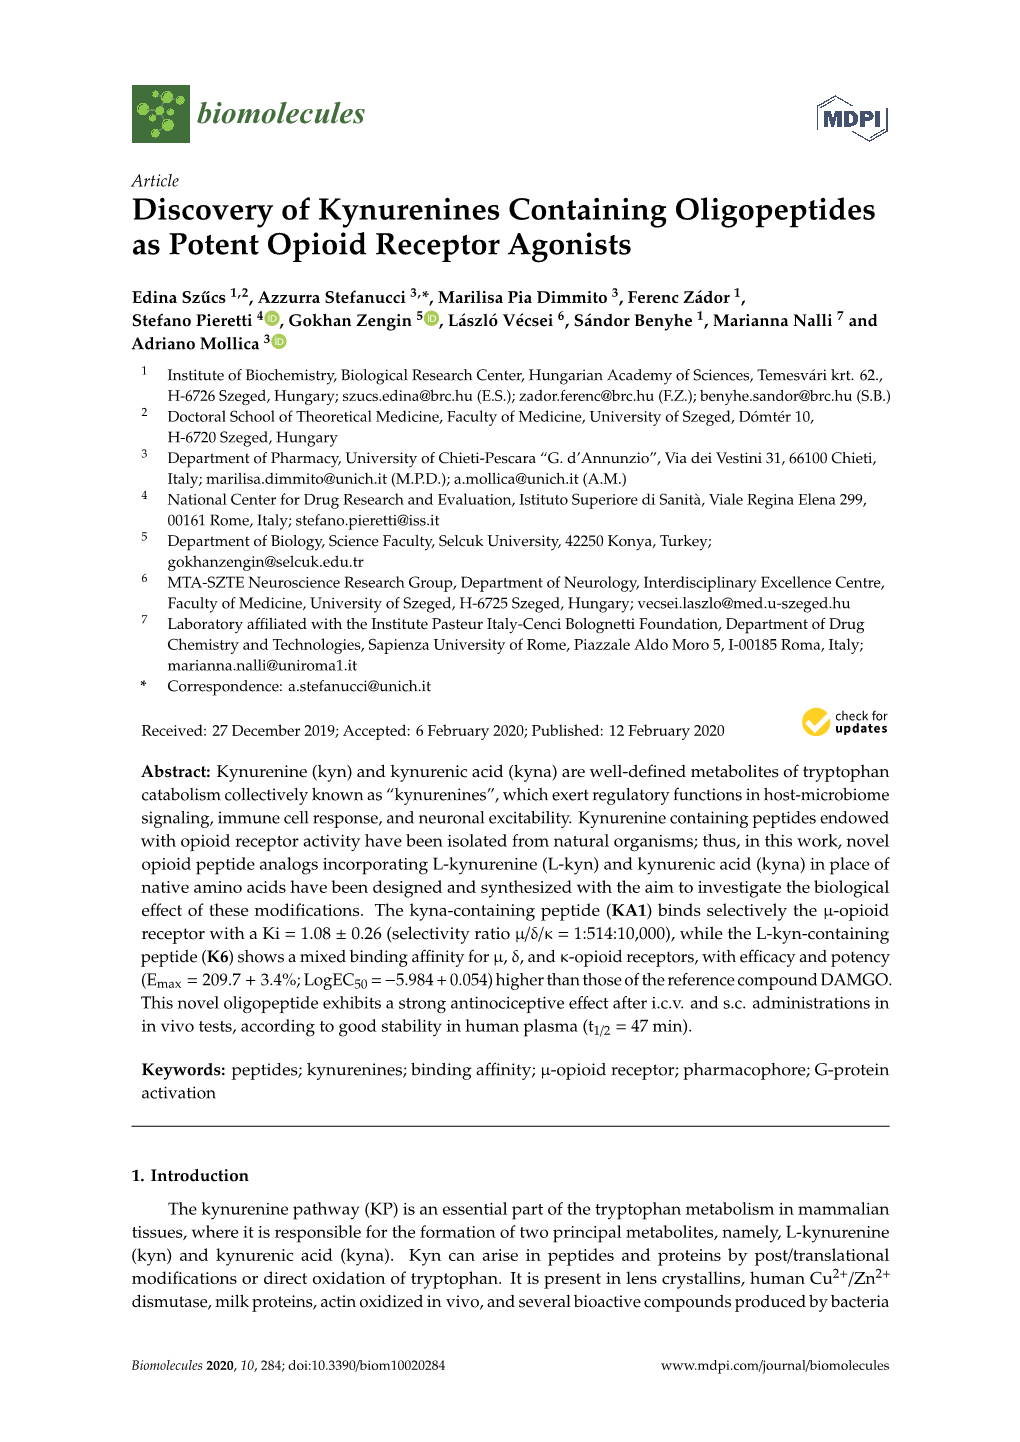 Discovery of Kynurenines Containing Oligopeptides As Potent Opioid Receptor Agonists